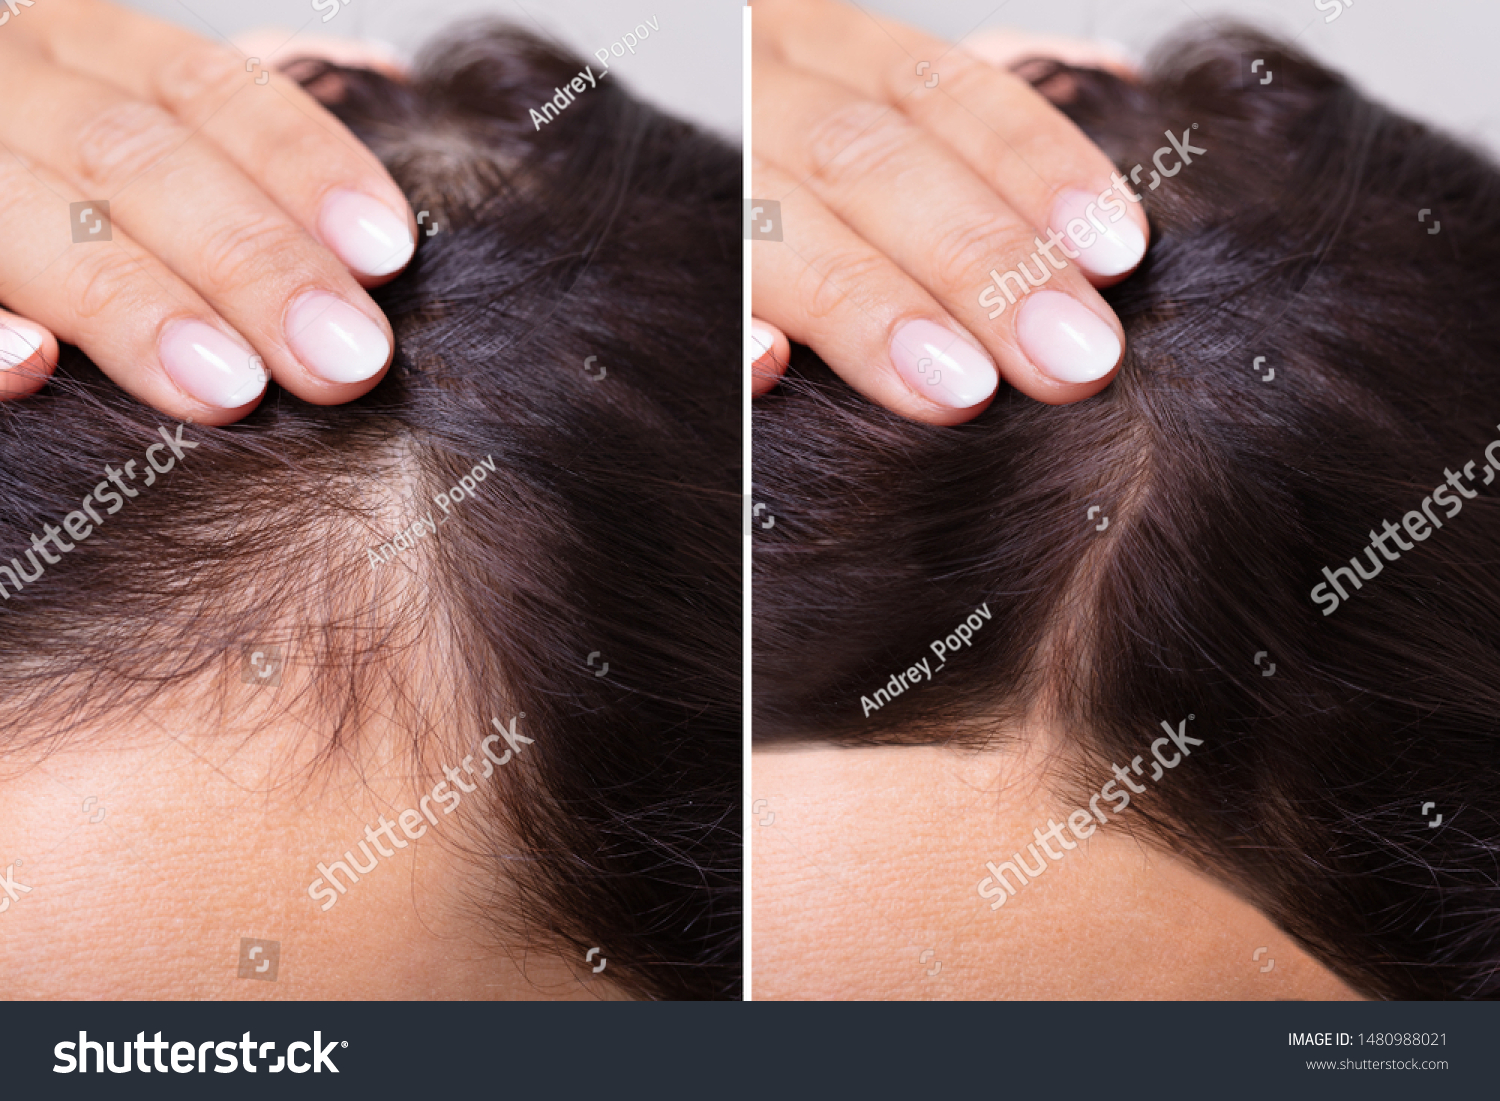 Woman Before And After Hair Loss Treatment #1480988021